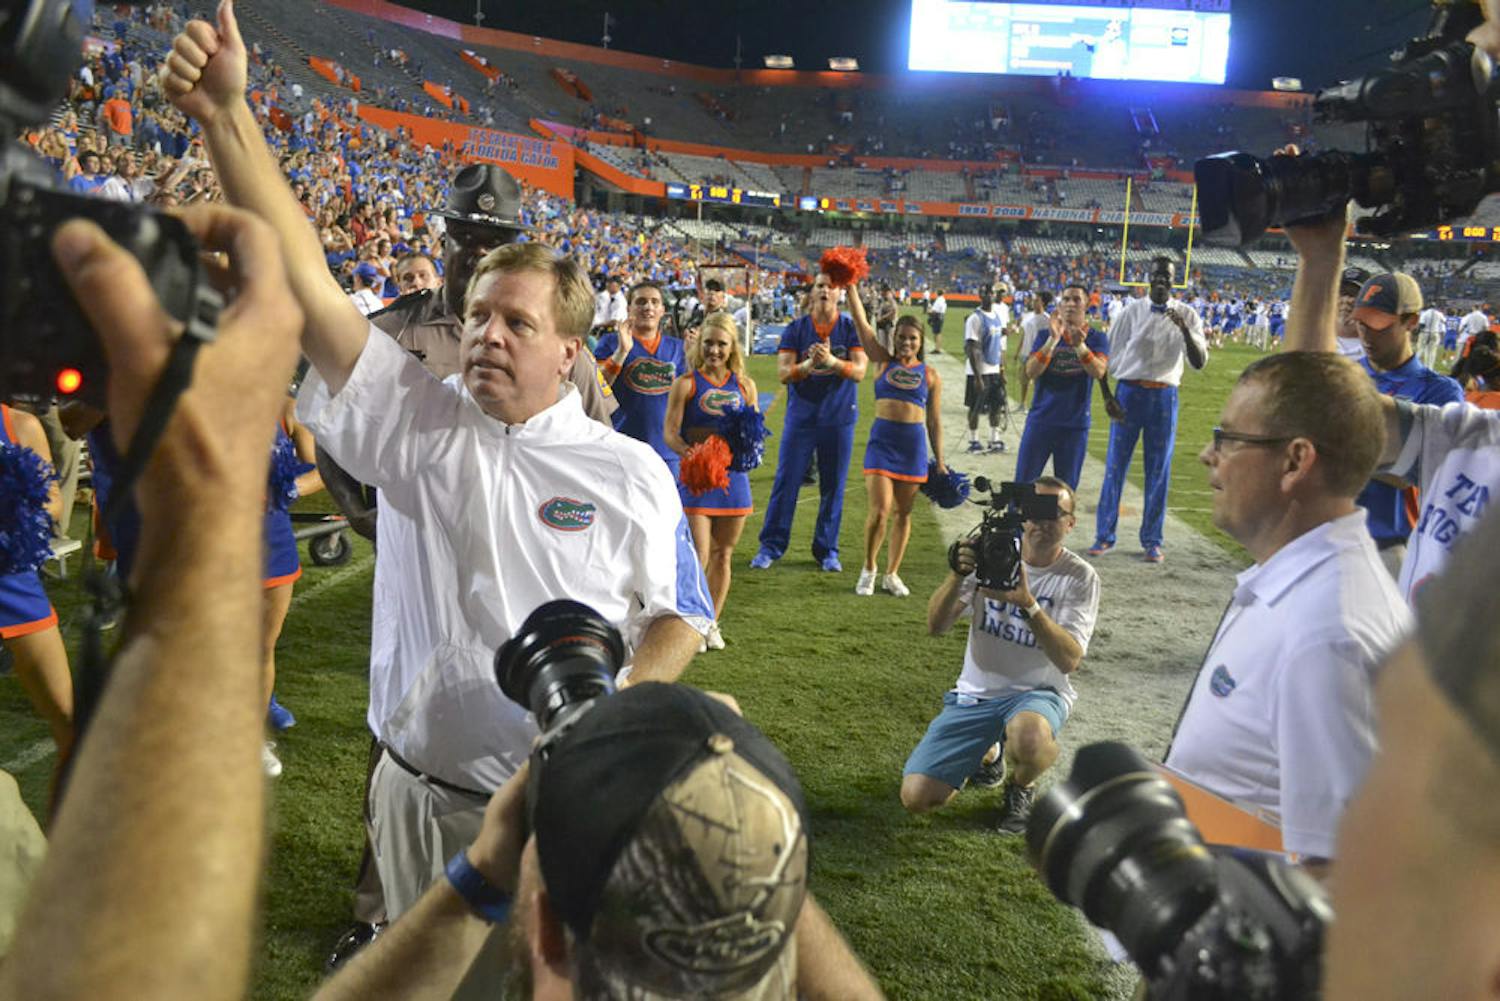 Surrounded by media, Jim McElwain celebrates Florida's 61-13 win against New Mexico State on Sept. 5, 2015. This was his first game as head UF football coach.